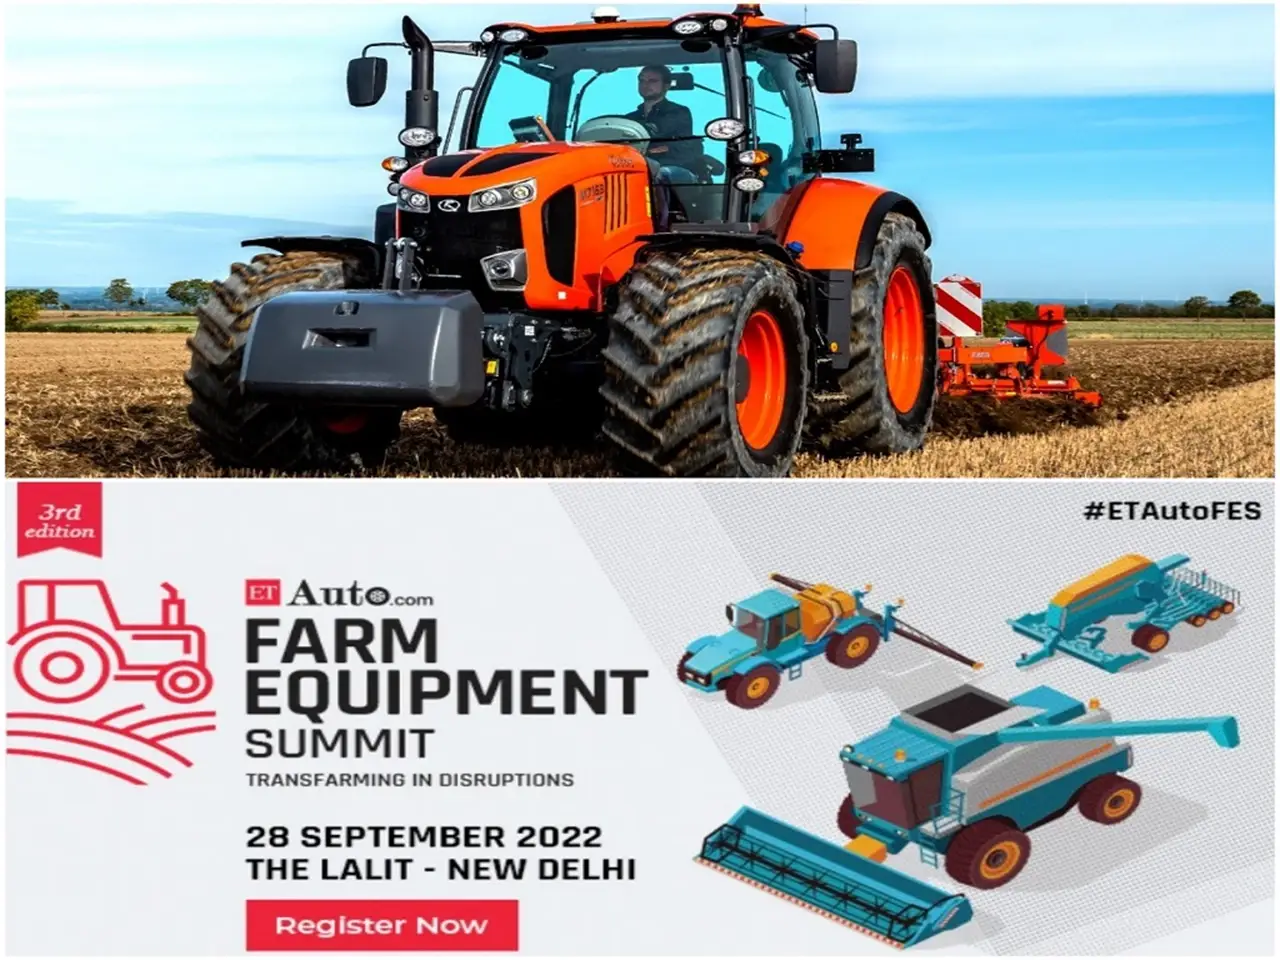 The 3rd edition of ETAuto Farm Equipment Summit will discuss the current issues, new & emerging technologies and market opportunities.